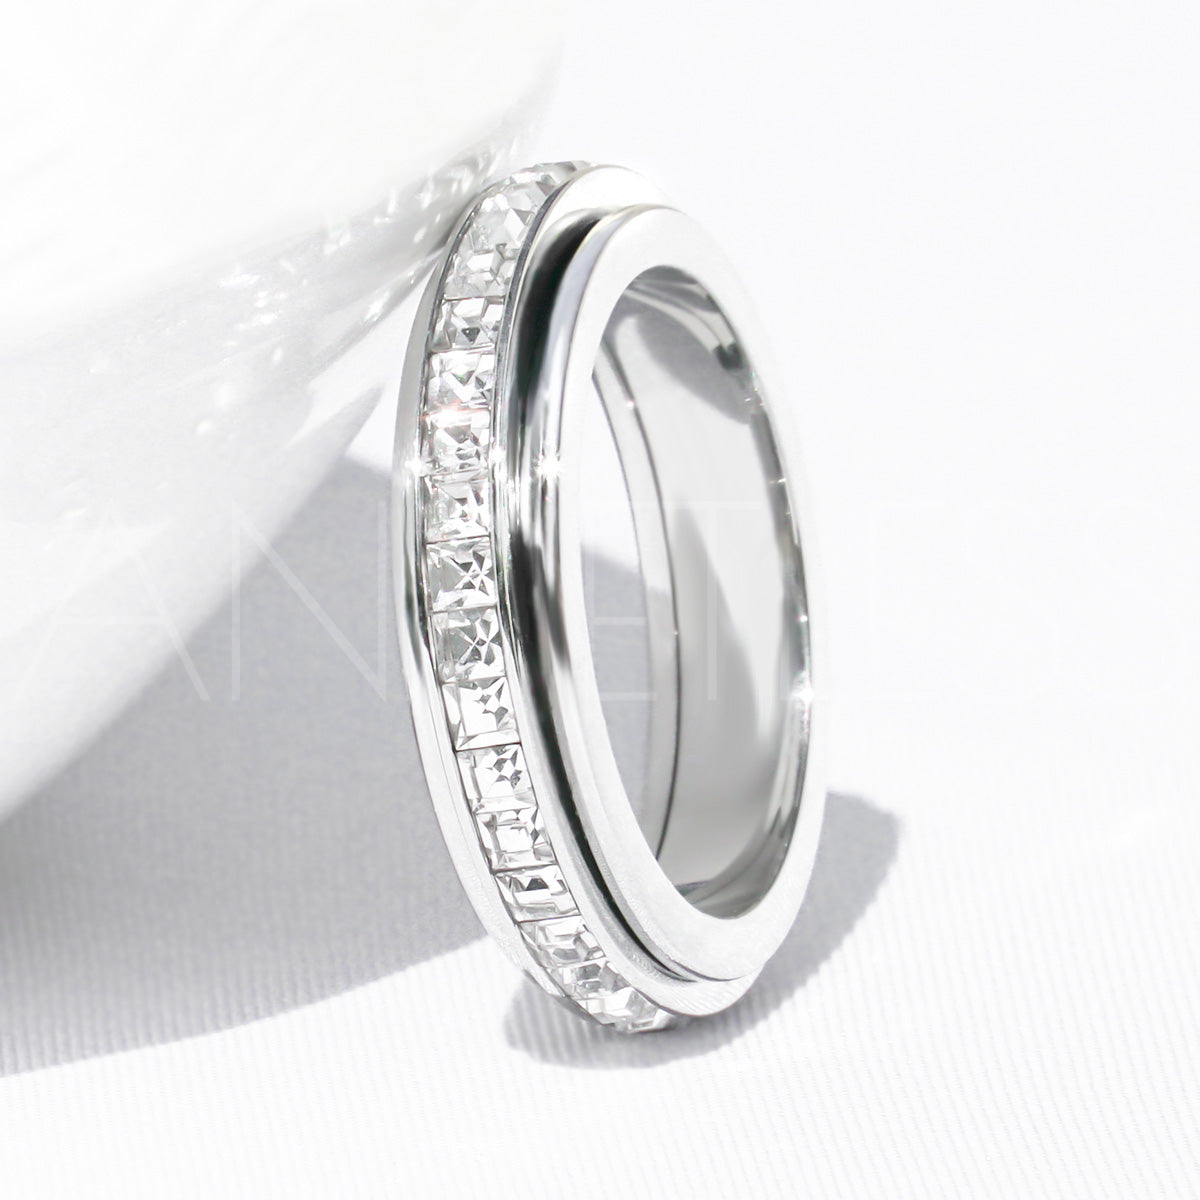 Silver crystal fidget ring leaning against the edge of a white bowl on a white background